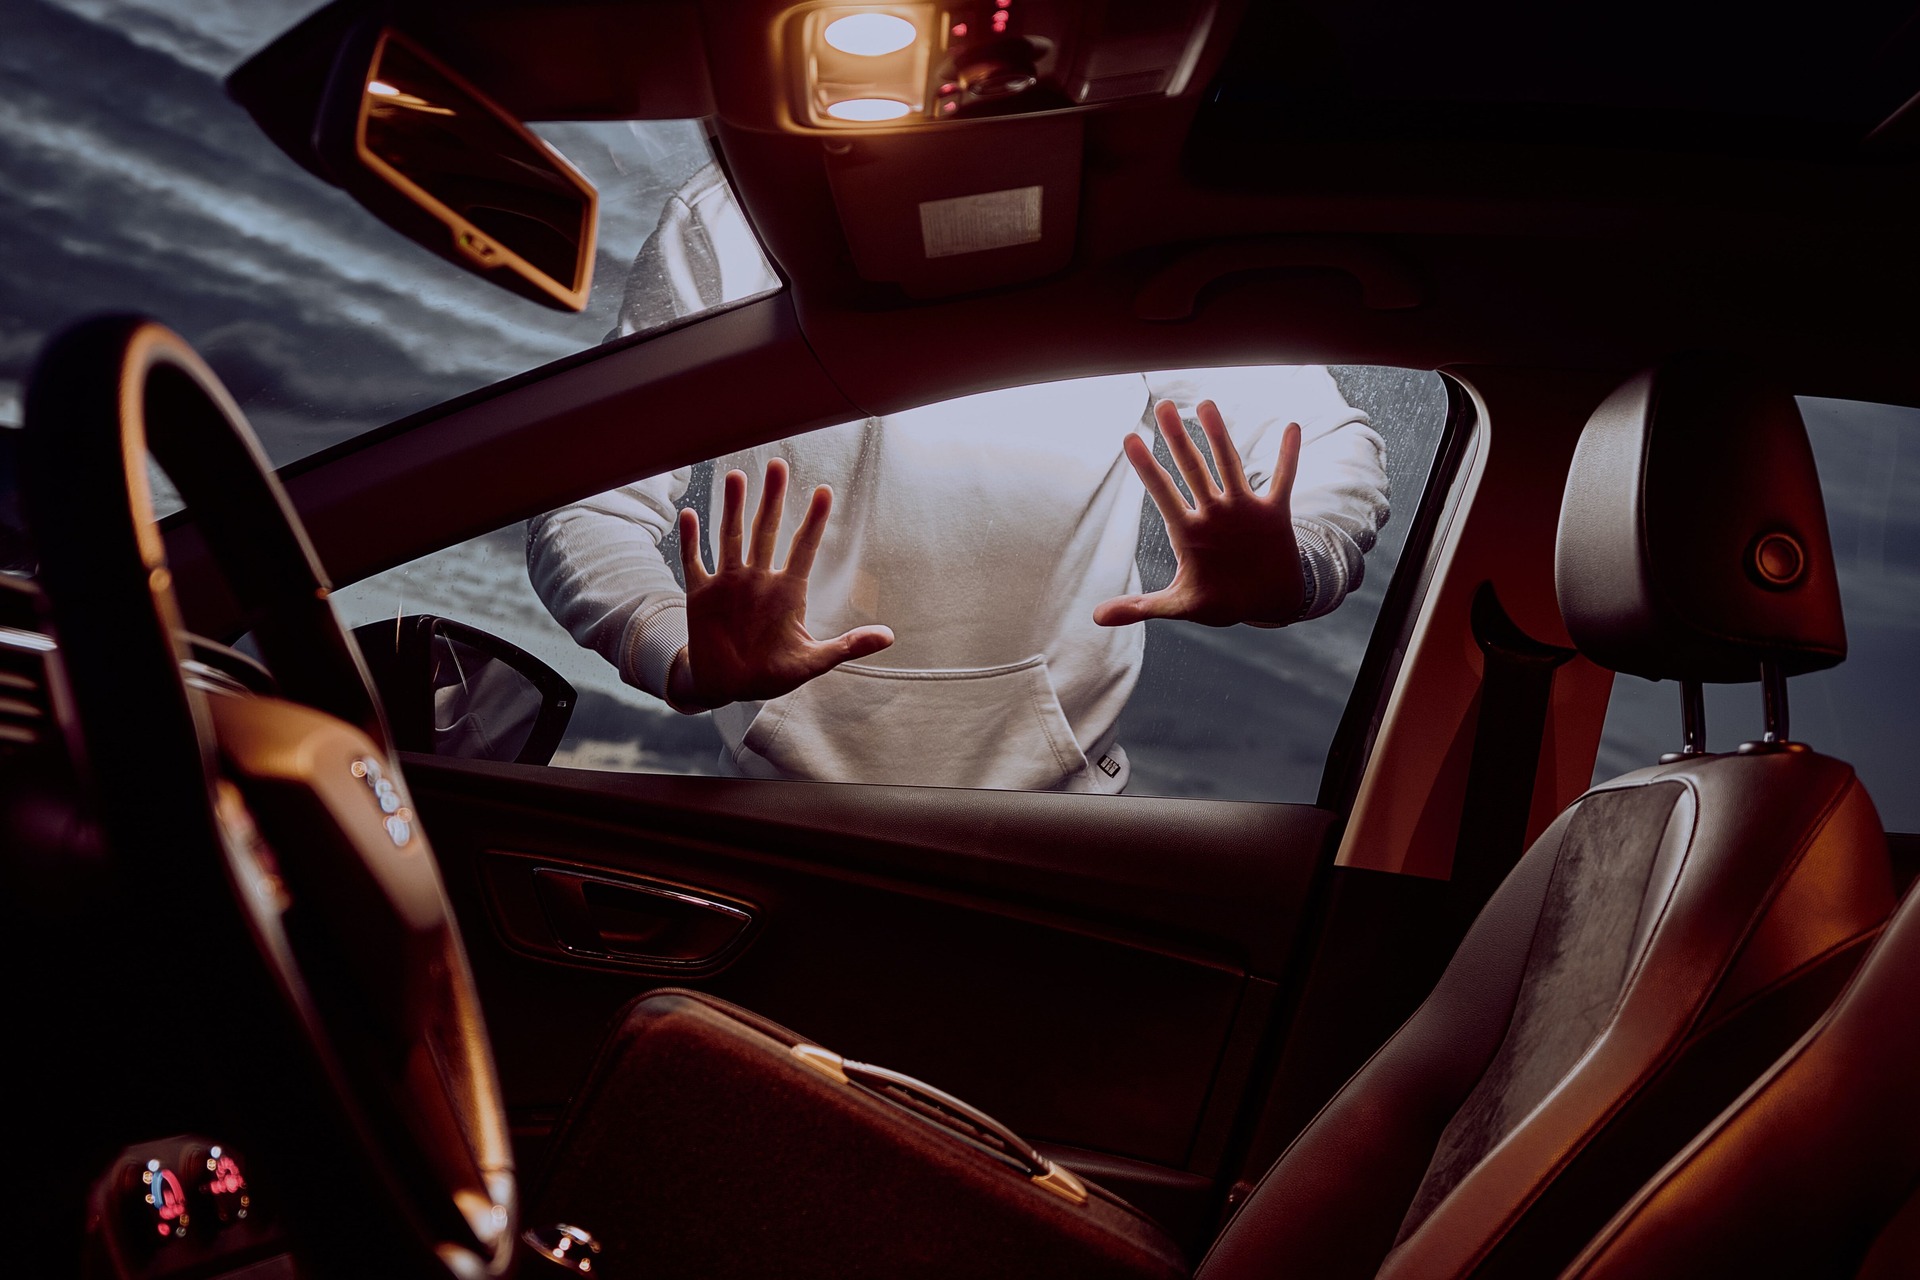 Interior view of a man trying to break into a locked car